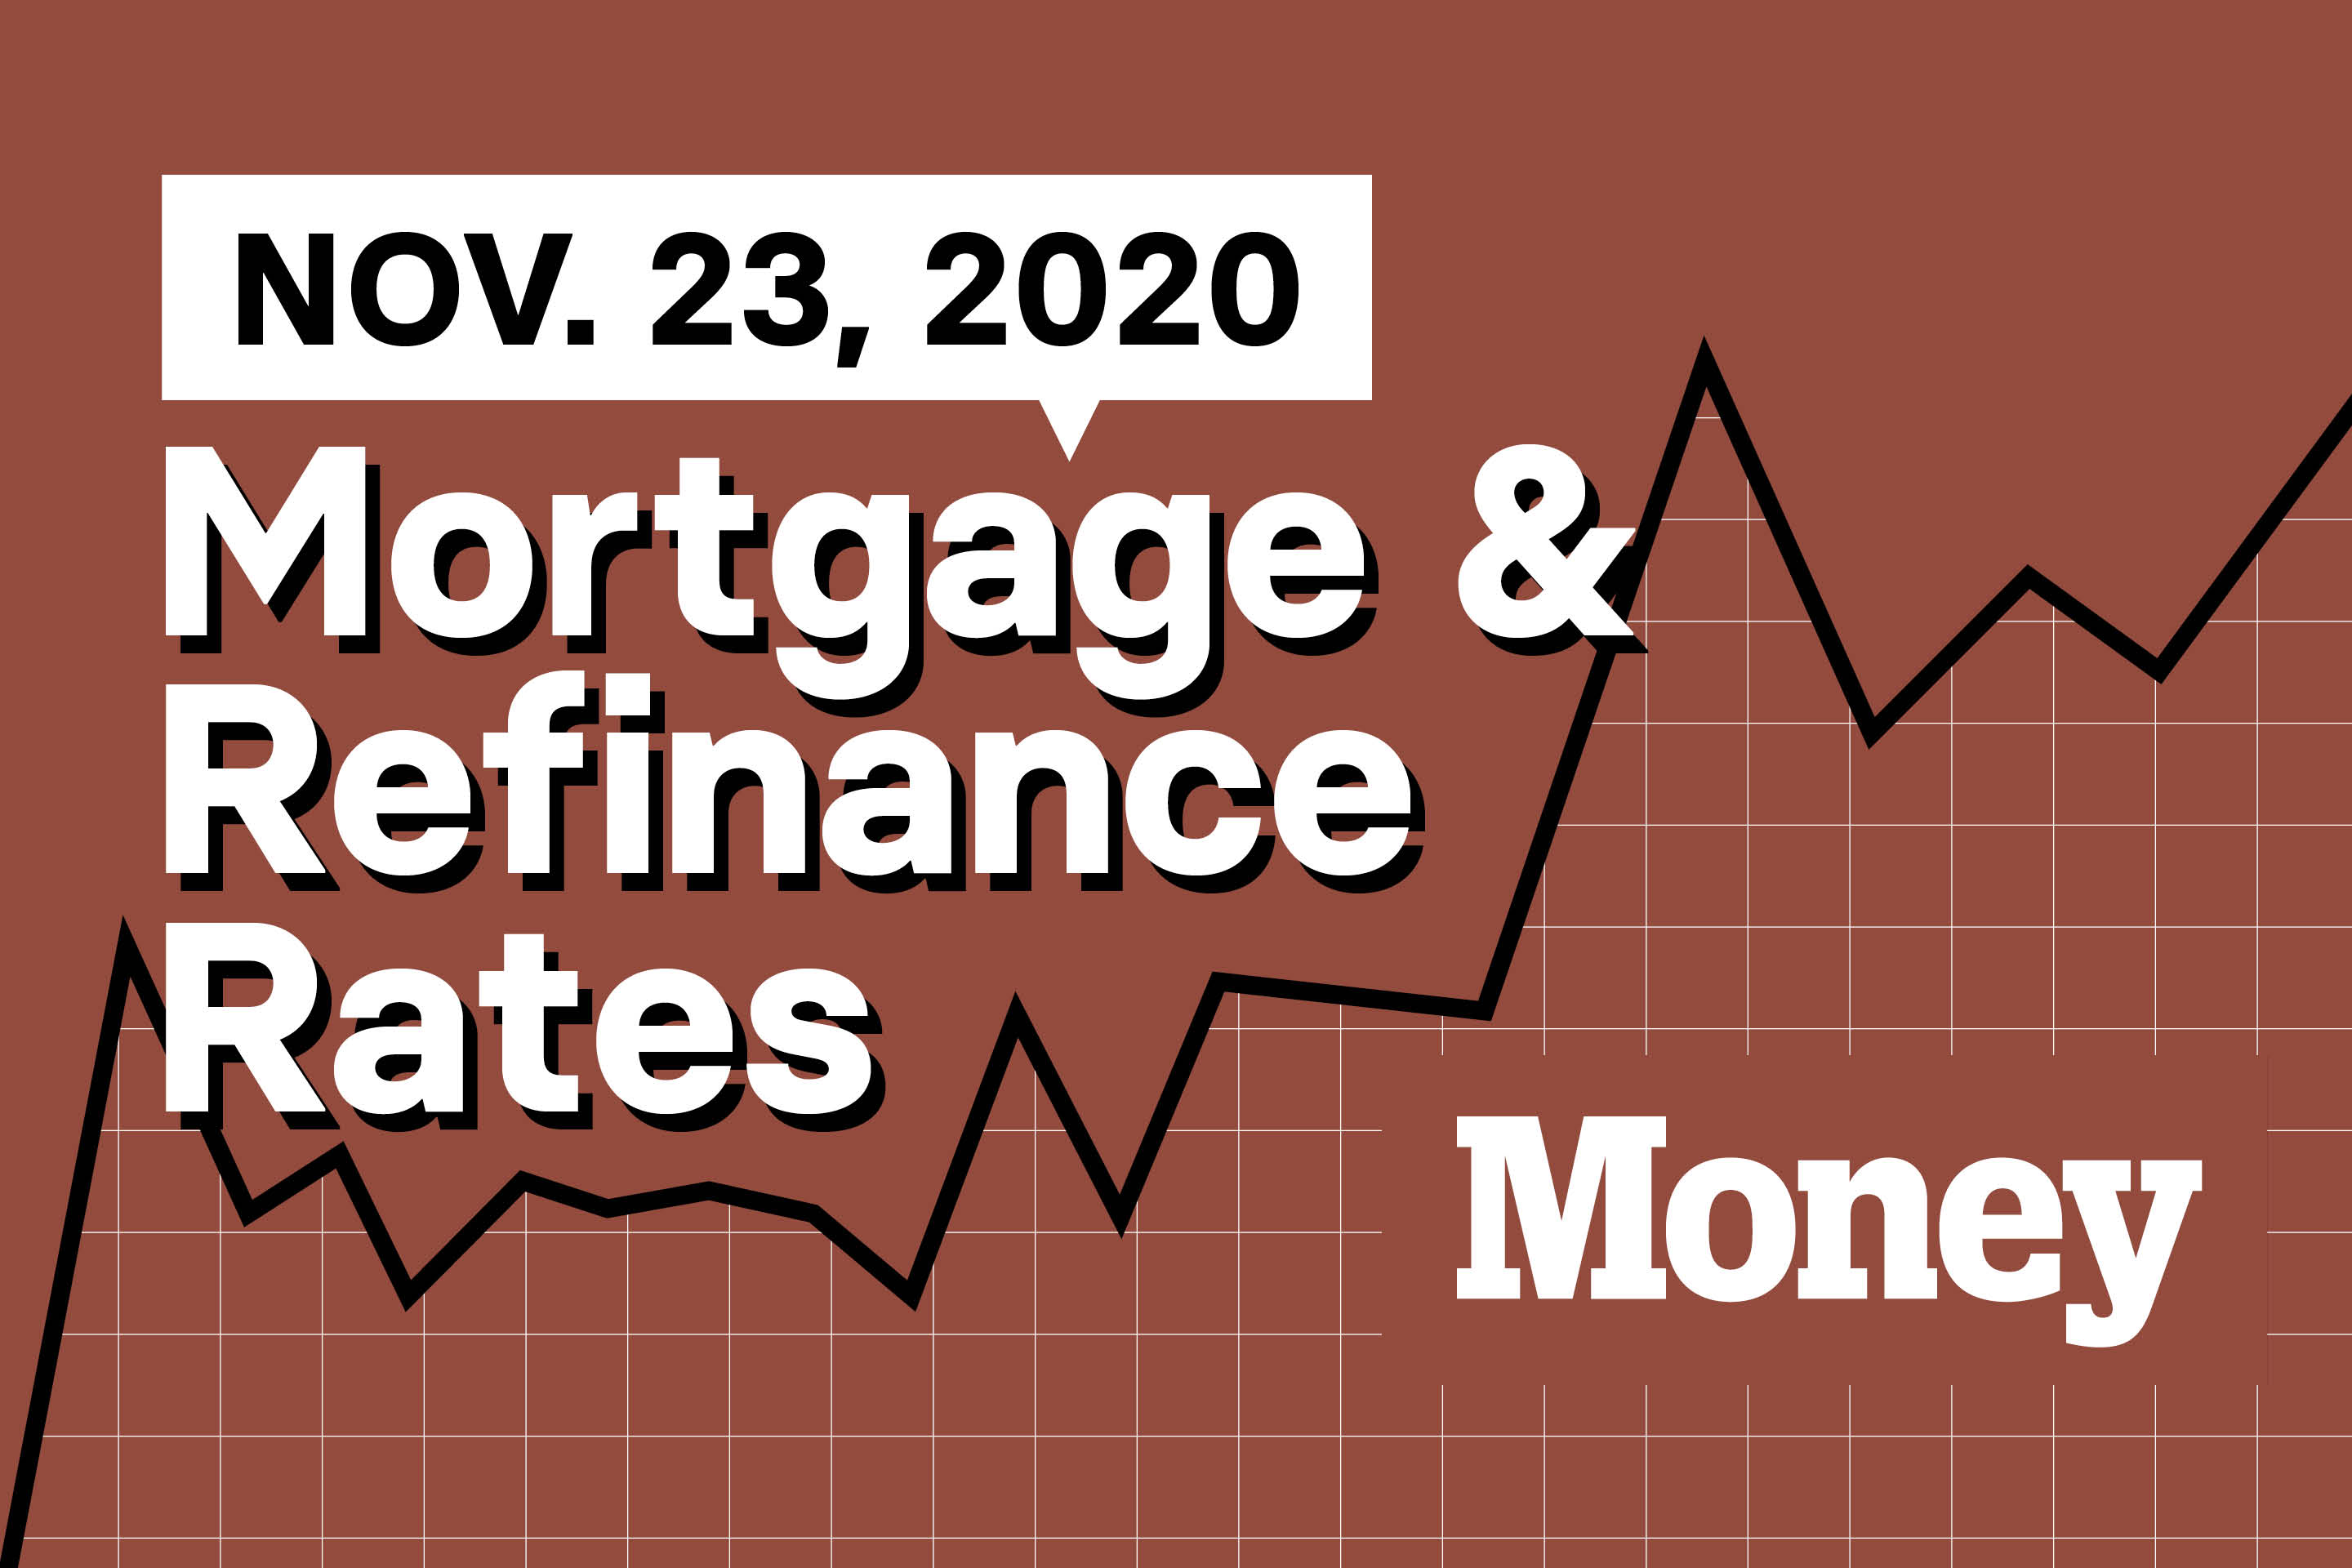 Here Are Today's Best Mortgage & Refinance Rates for November 23, 2020